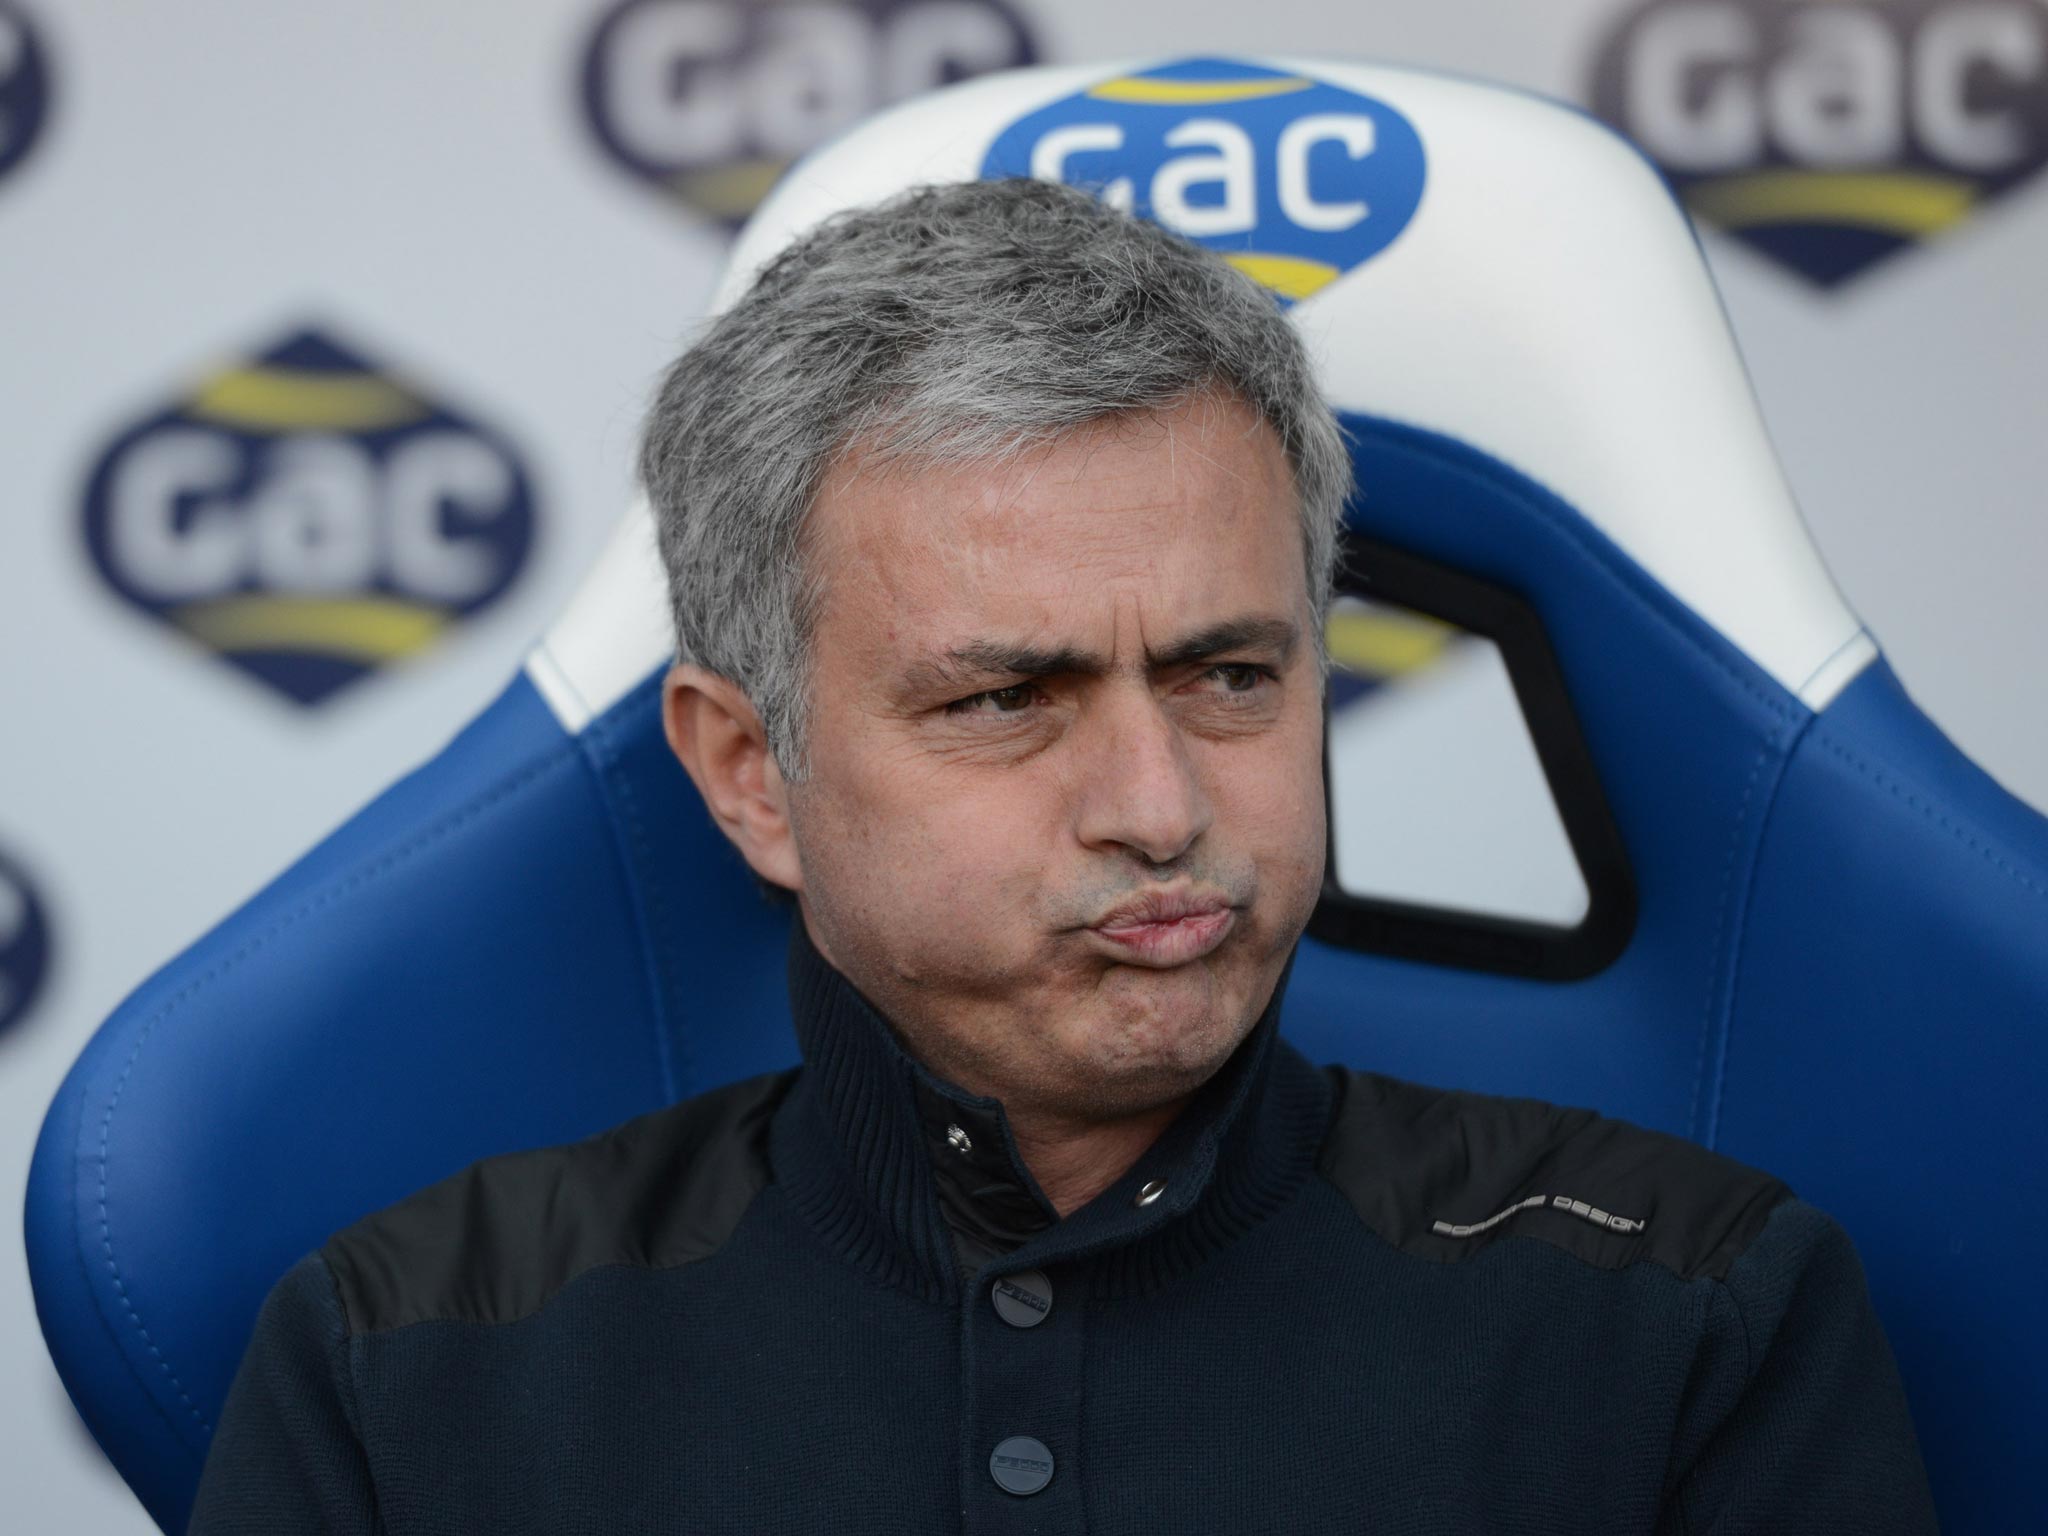 Chelsea manager Jose Mourinho looks on from the touchline